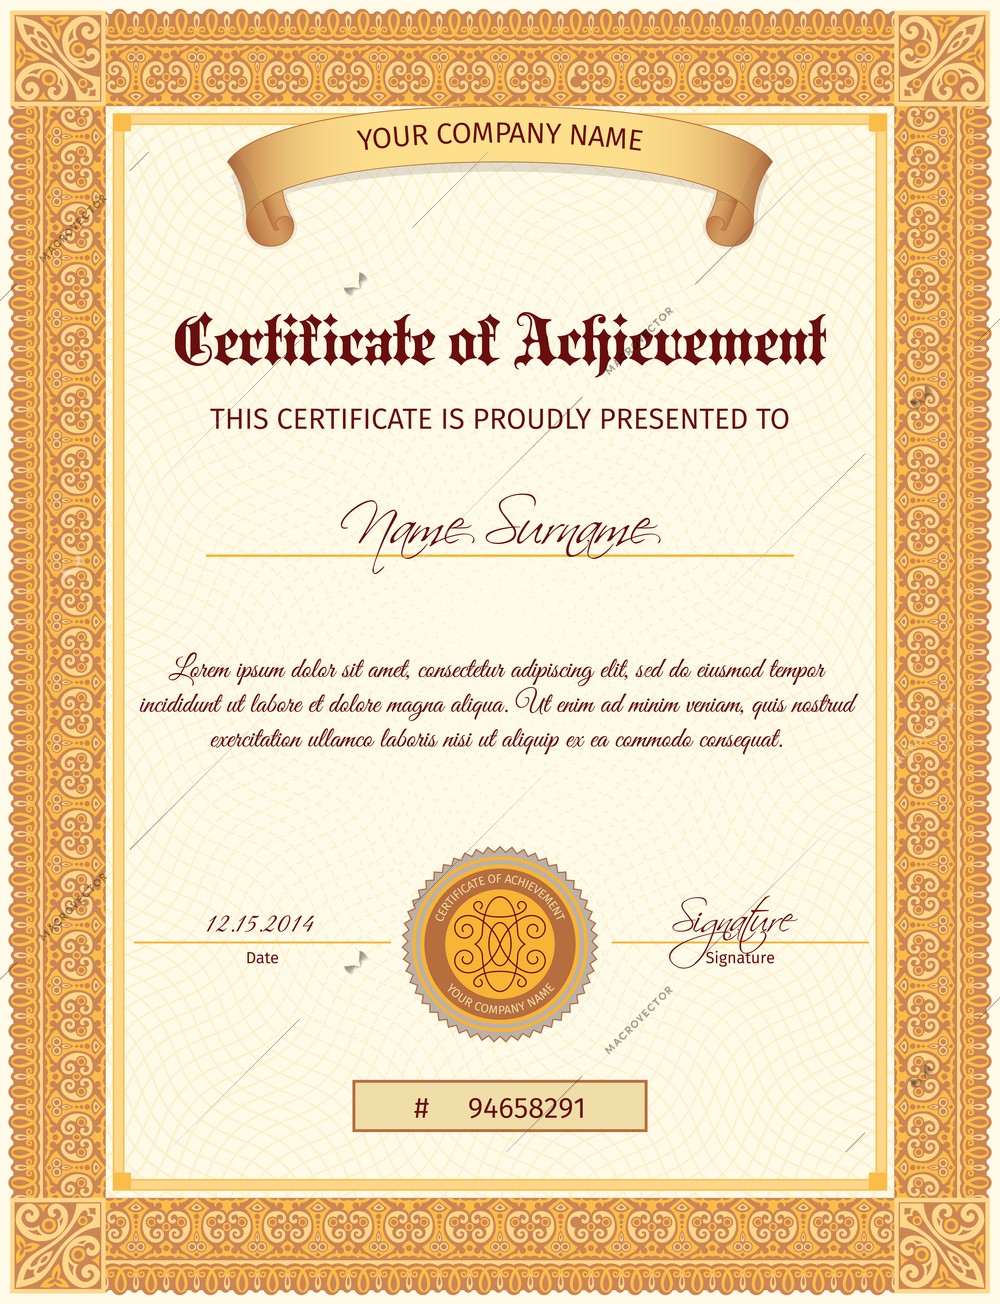 Certificate document of achievement vertical template with seal ribbon and elegant ornament vector illustration